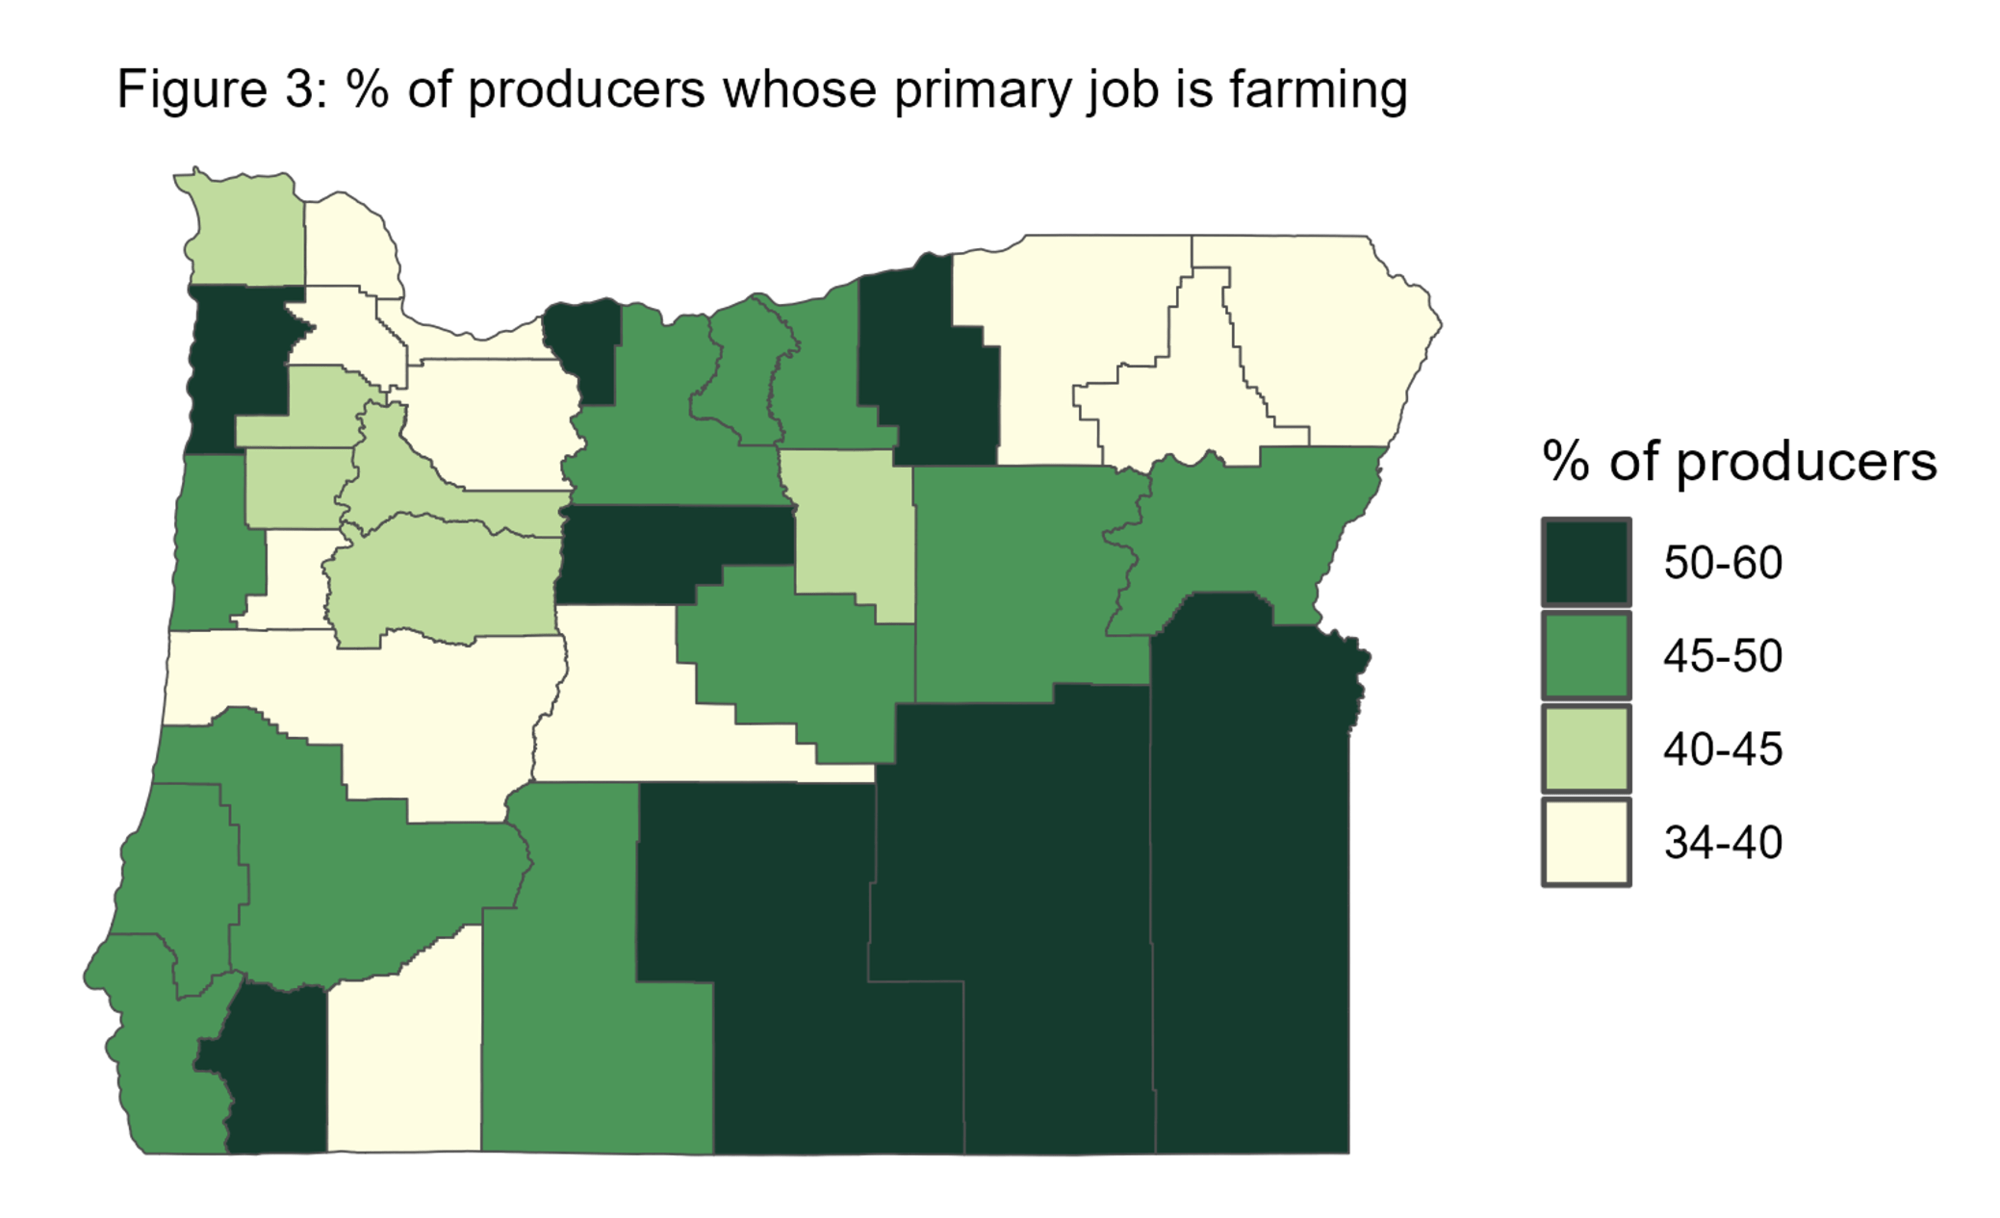 Map showing % of producers whose primary job is farming by Oregon county